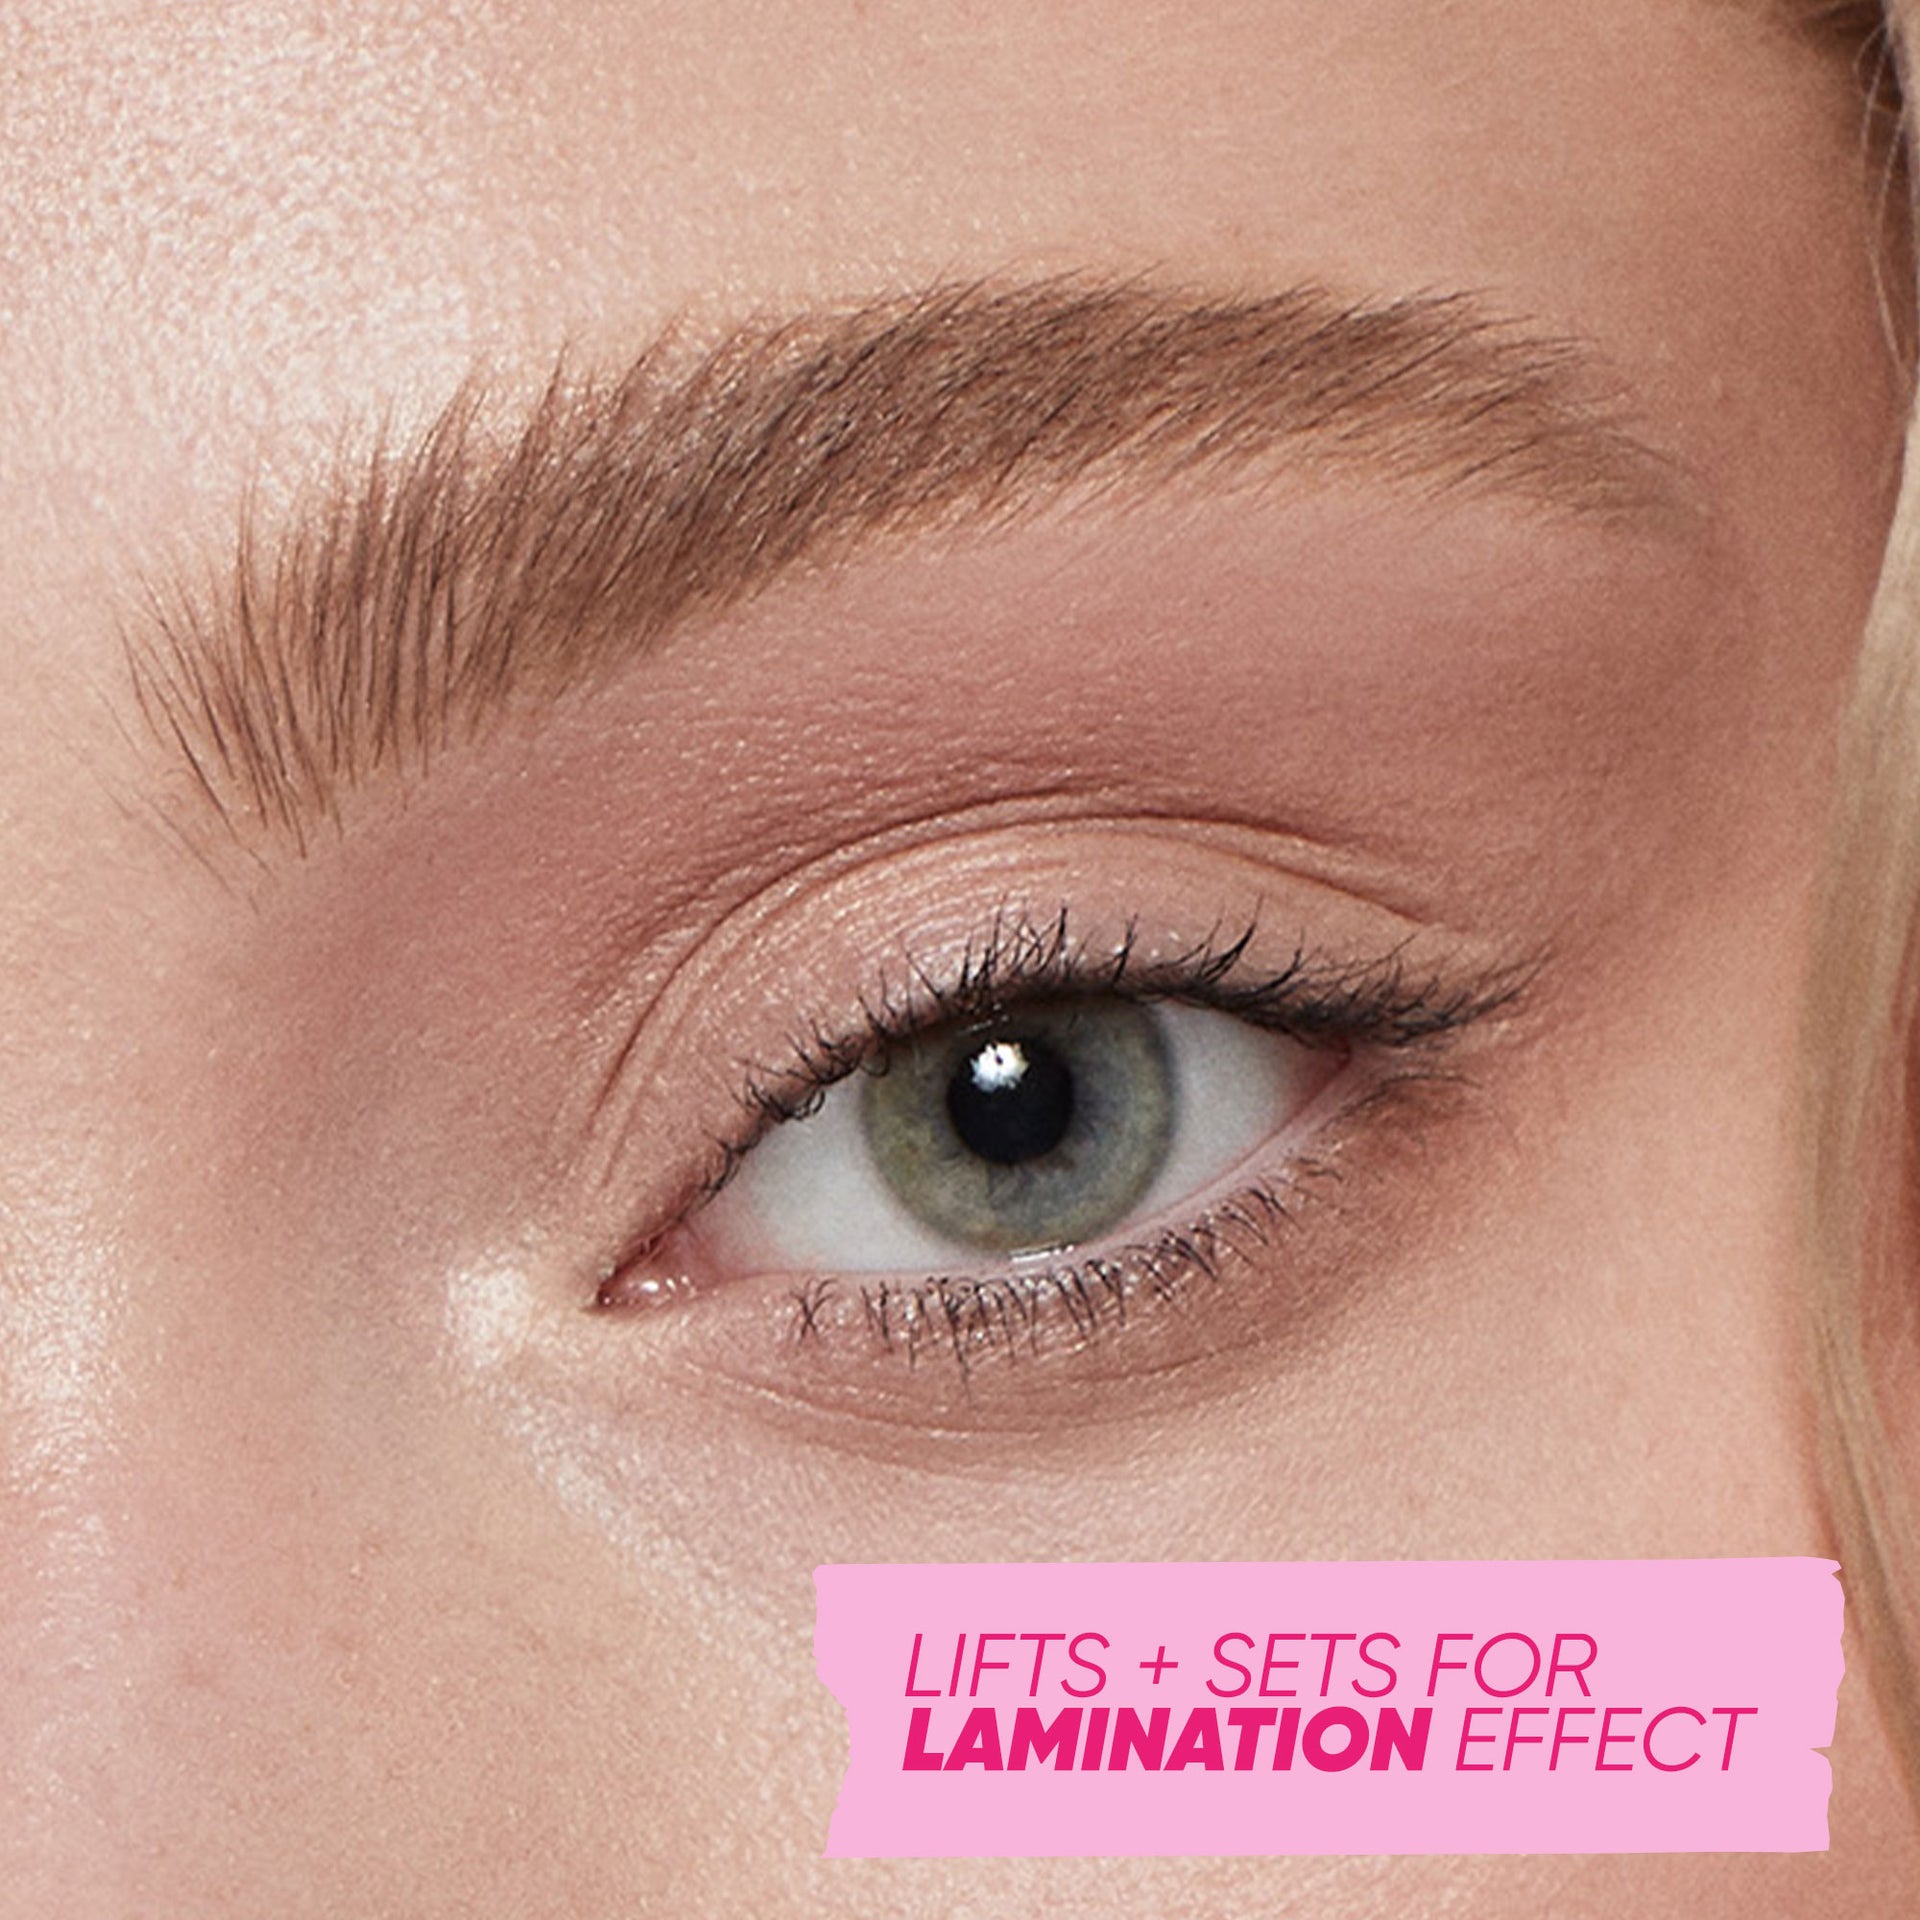 Close-up image showcasing Air Brow Clear's lift & set for perfect eyebrow lamination effect."